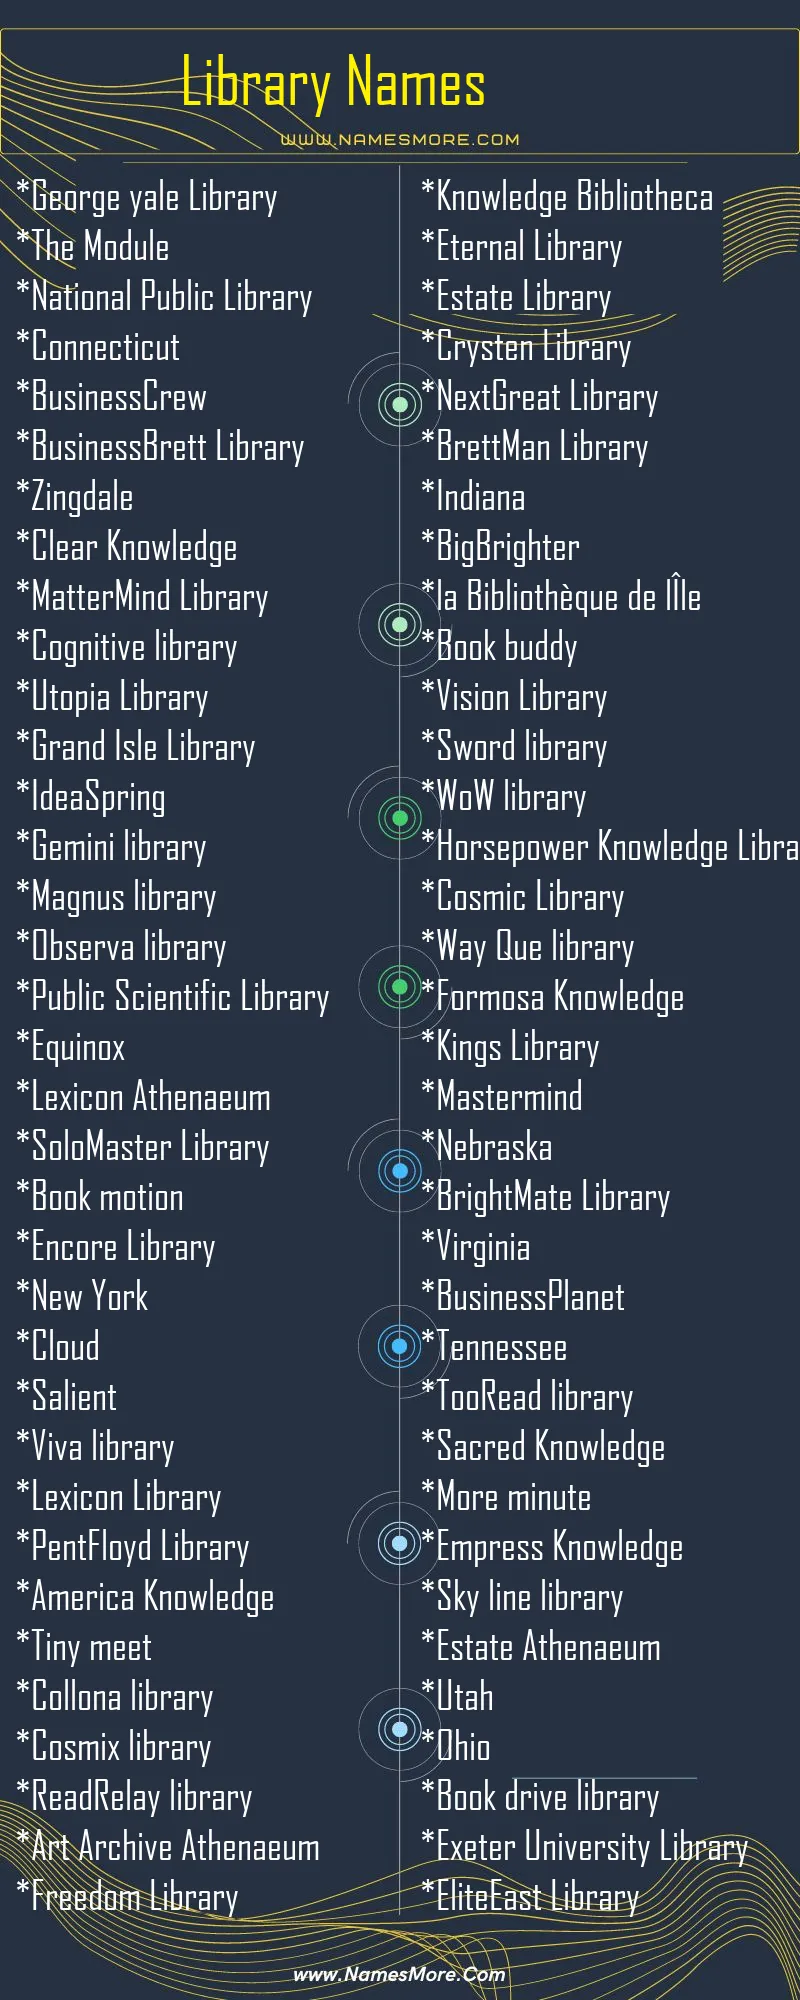 Library Names List Infographic